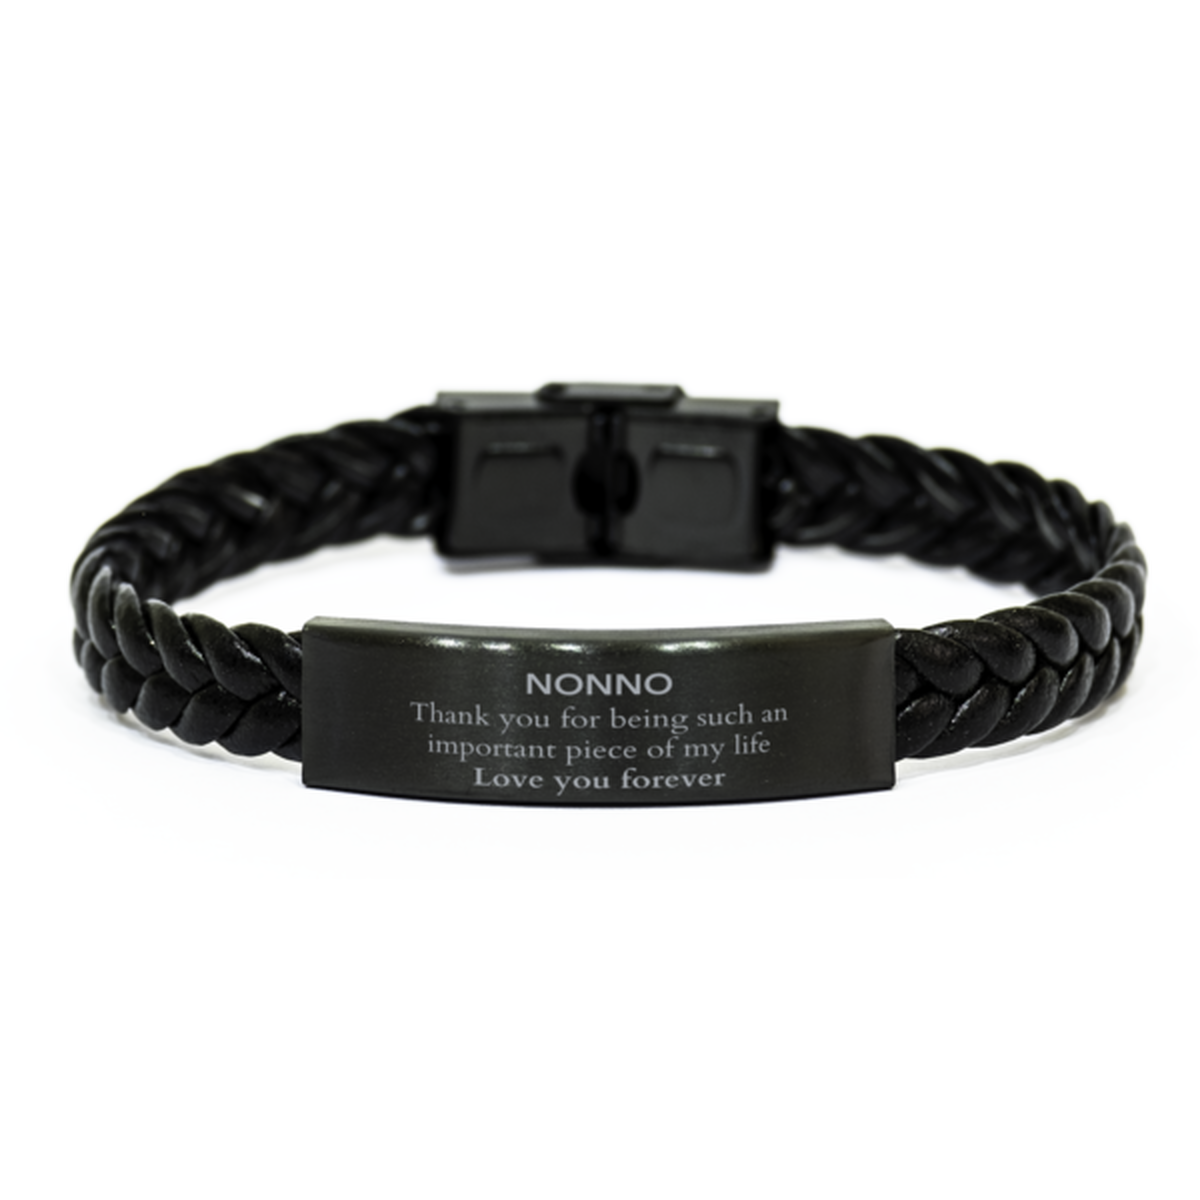 Appropriate Nonno Braided Leather Bracelet Epic Birthday Gifts for Nonno Thank you for being such an important piece of my life Nonno Christmas Mothers Fathers Day